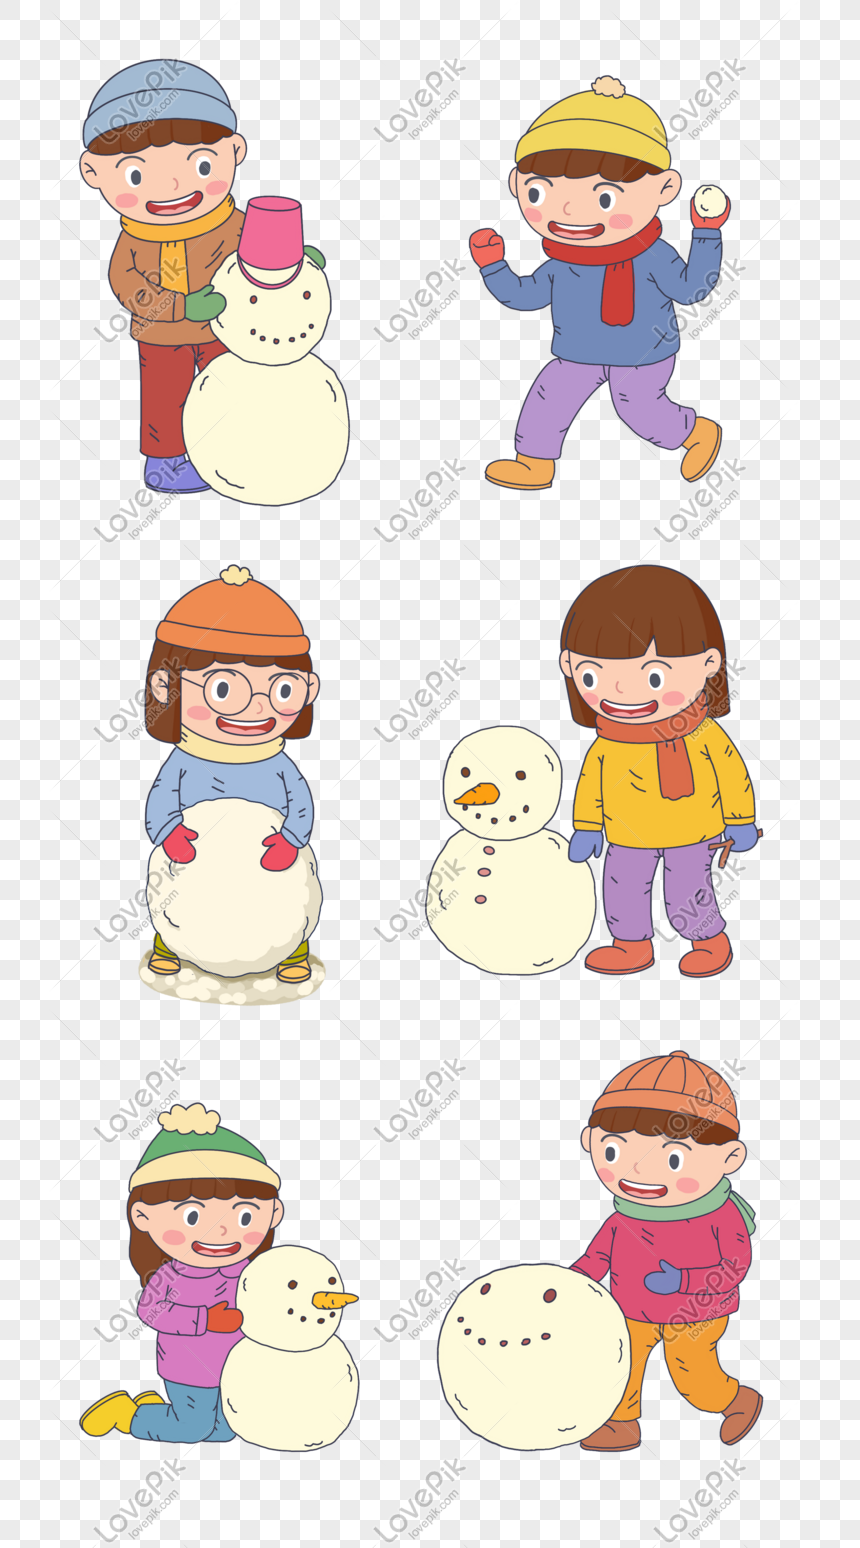 Winter Winter Cartoon Hand Drawn Snowman Series PNG Picture And ...